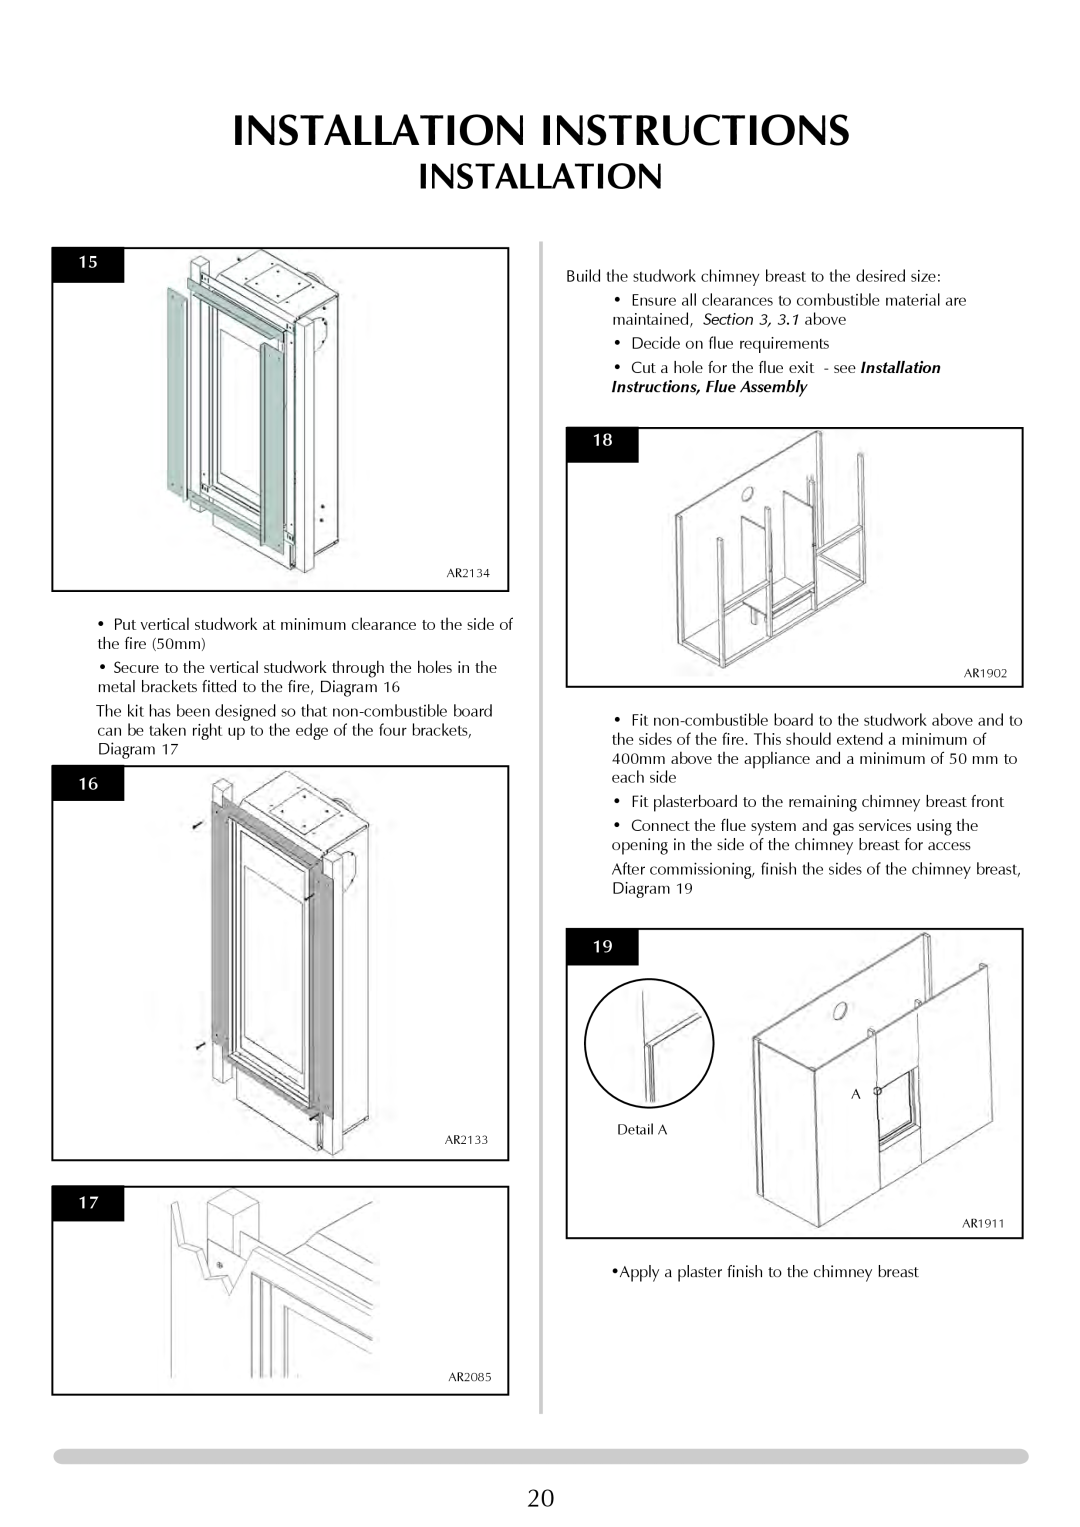 Stovax Studio 22 manual Installation Instructions, Decide on flue requirements, Instructions, Flue Assembly 